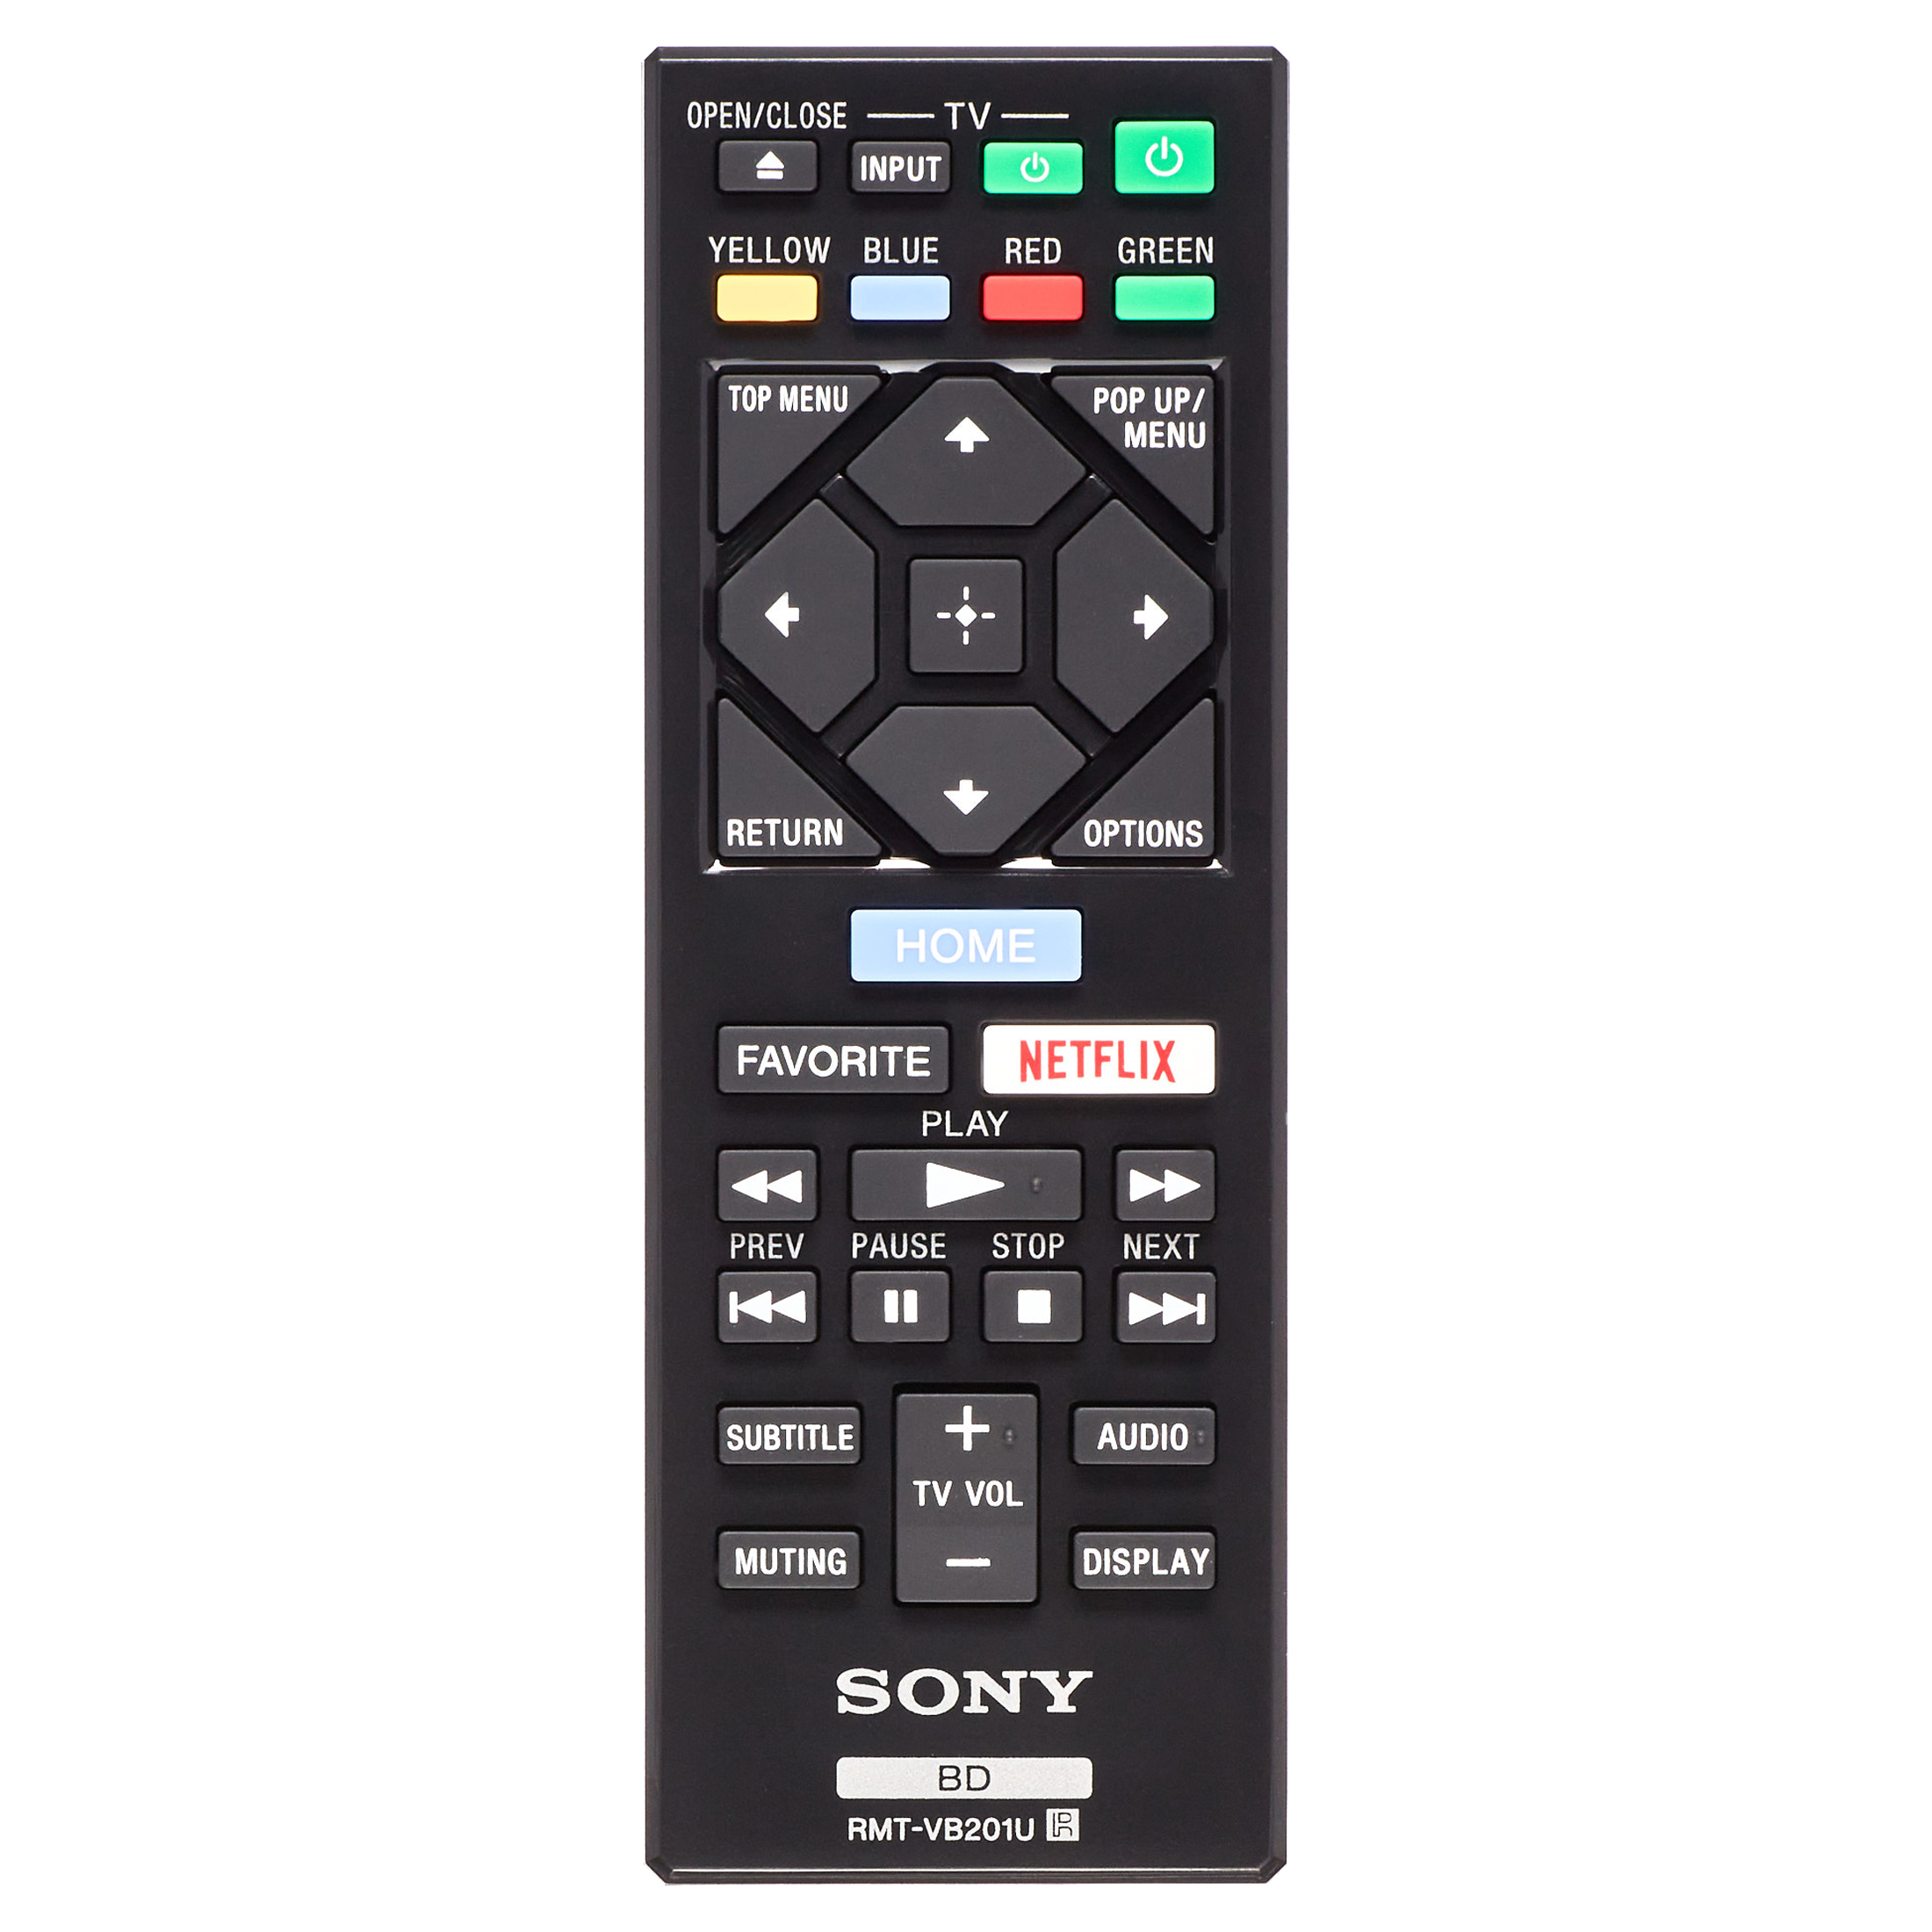 Sony BDP-S3700 Full HD Steaming Blu-ray DVD Player with built-in Wi-Fi, Dolby Digital TrueHD/DTS, and DVD upscaling - image 5 of 9